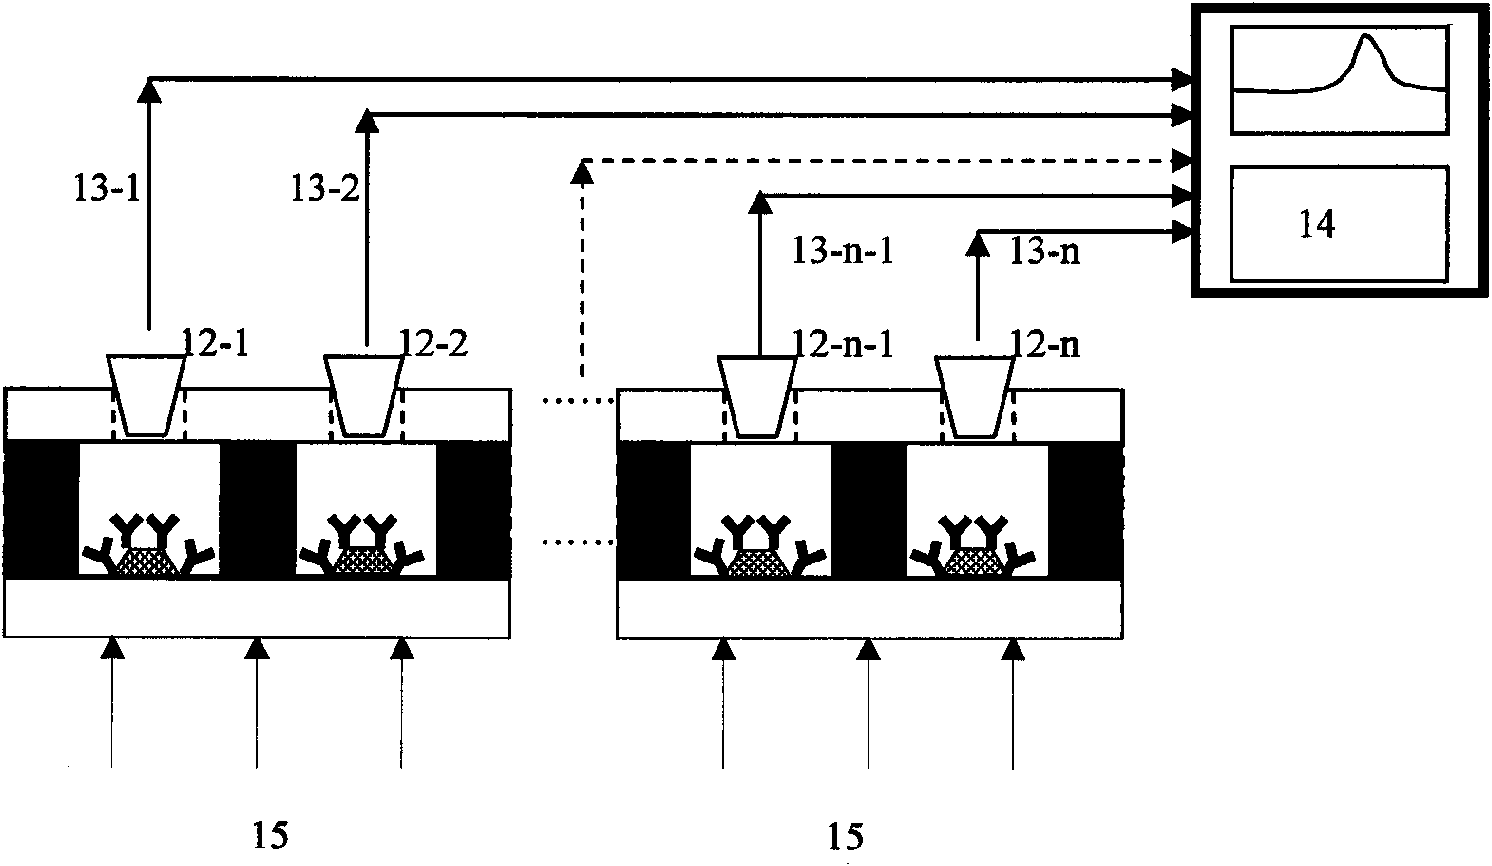 Preparation process of single nanoparticle and array-based biological molecule detector thereof